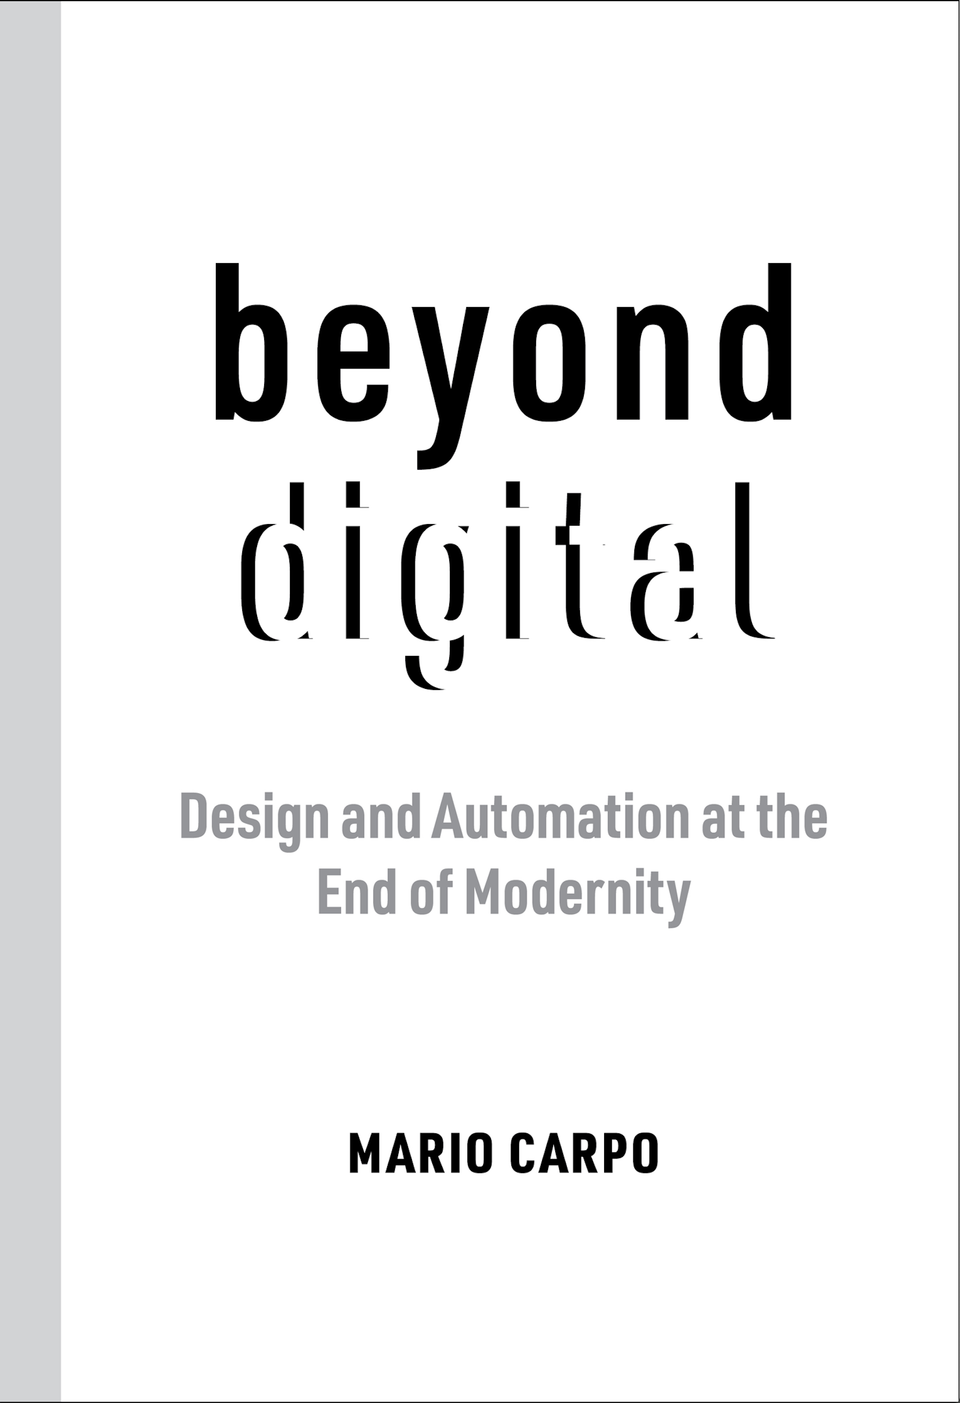 Mario Carpo: Beyond Digital - Design and Automation at the End of Modernity
